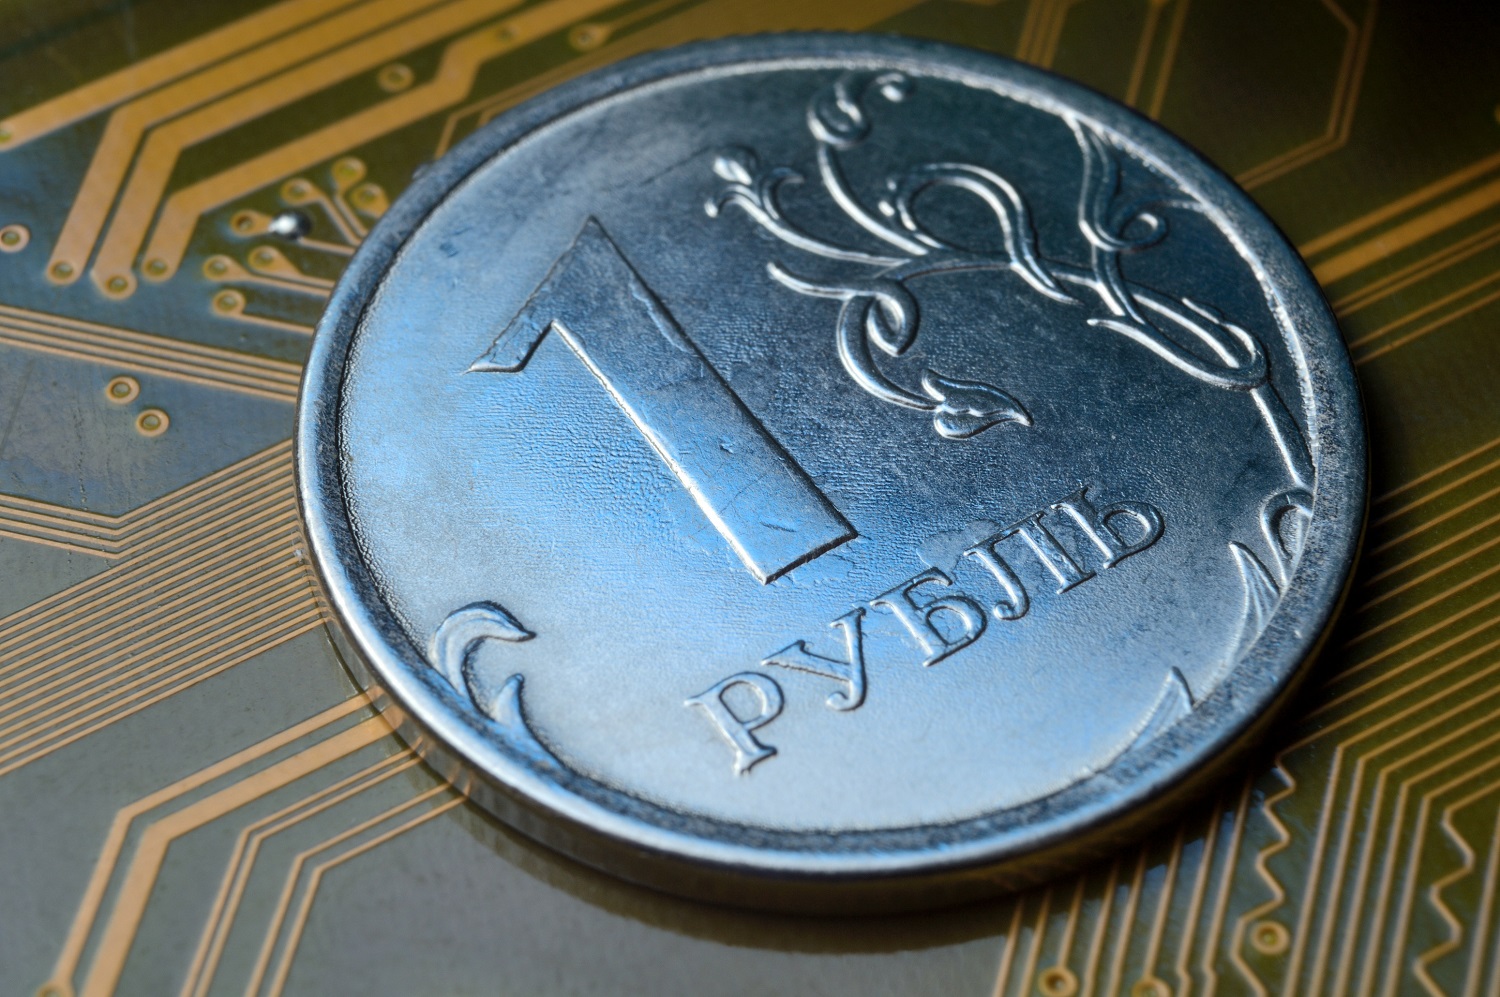 A Russian 1 ruble coin rests on an electrical circuit board.